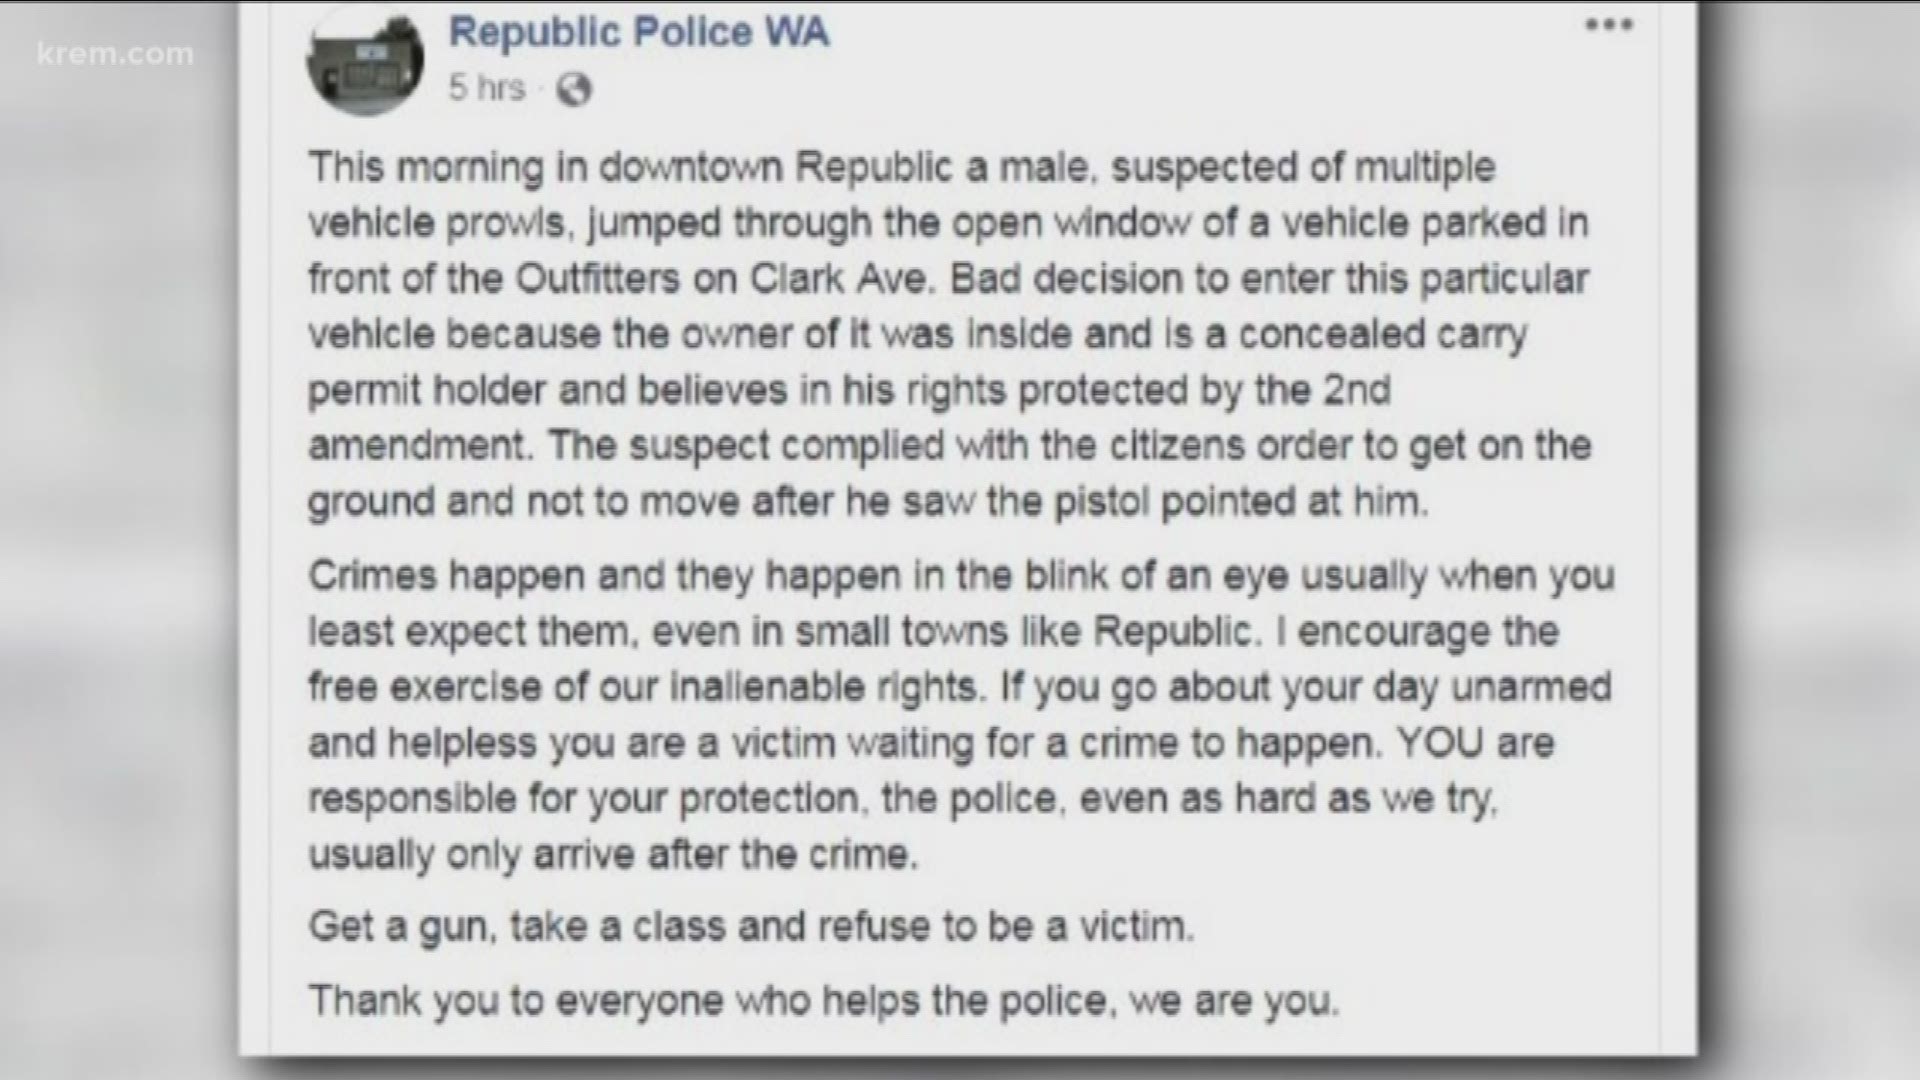 A post on the Republic Police Department's Facebook page detailed an incident where a man had to defend himself with a gun against a suspect who broke into his car with him still inside.